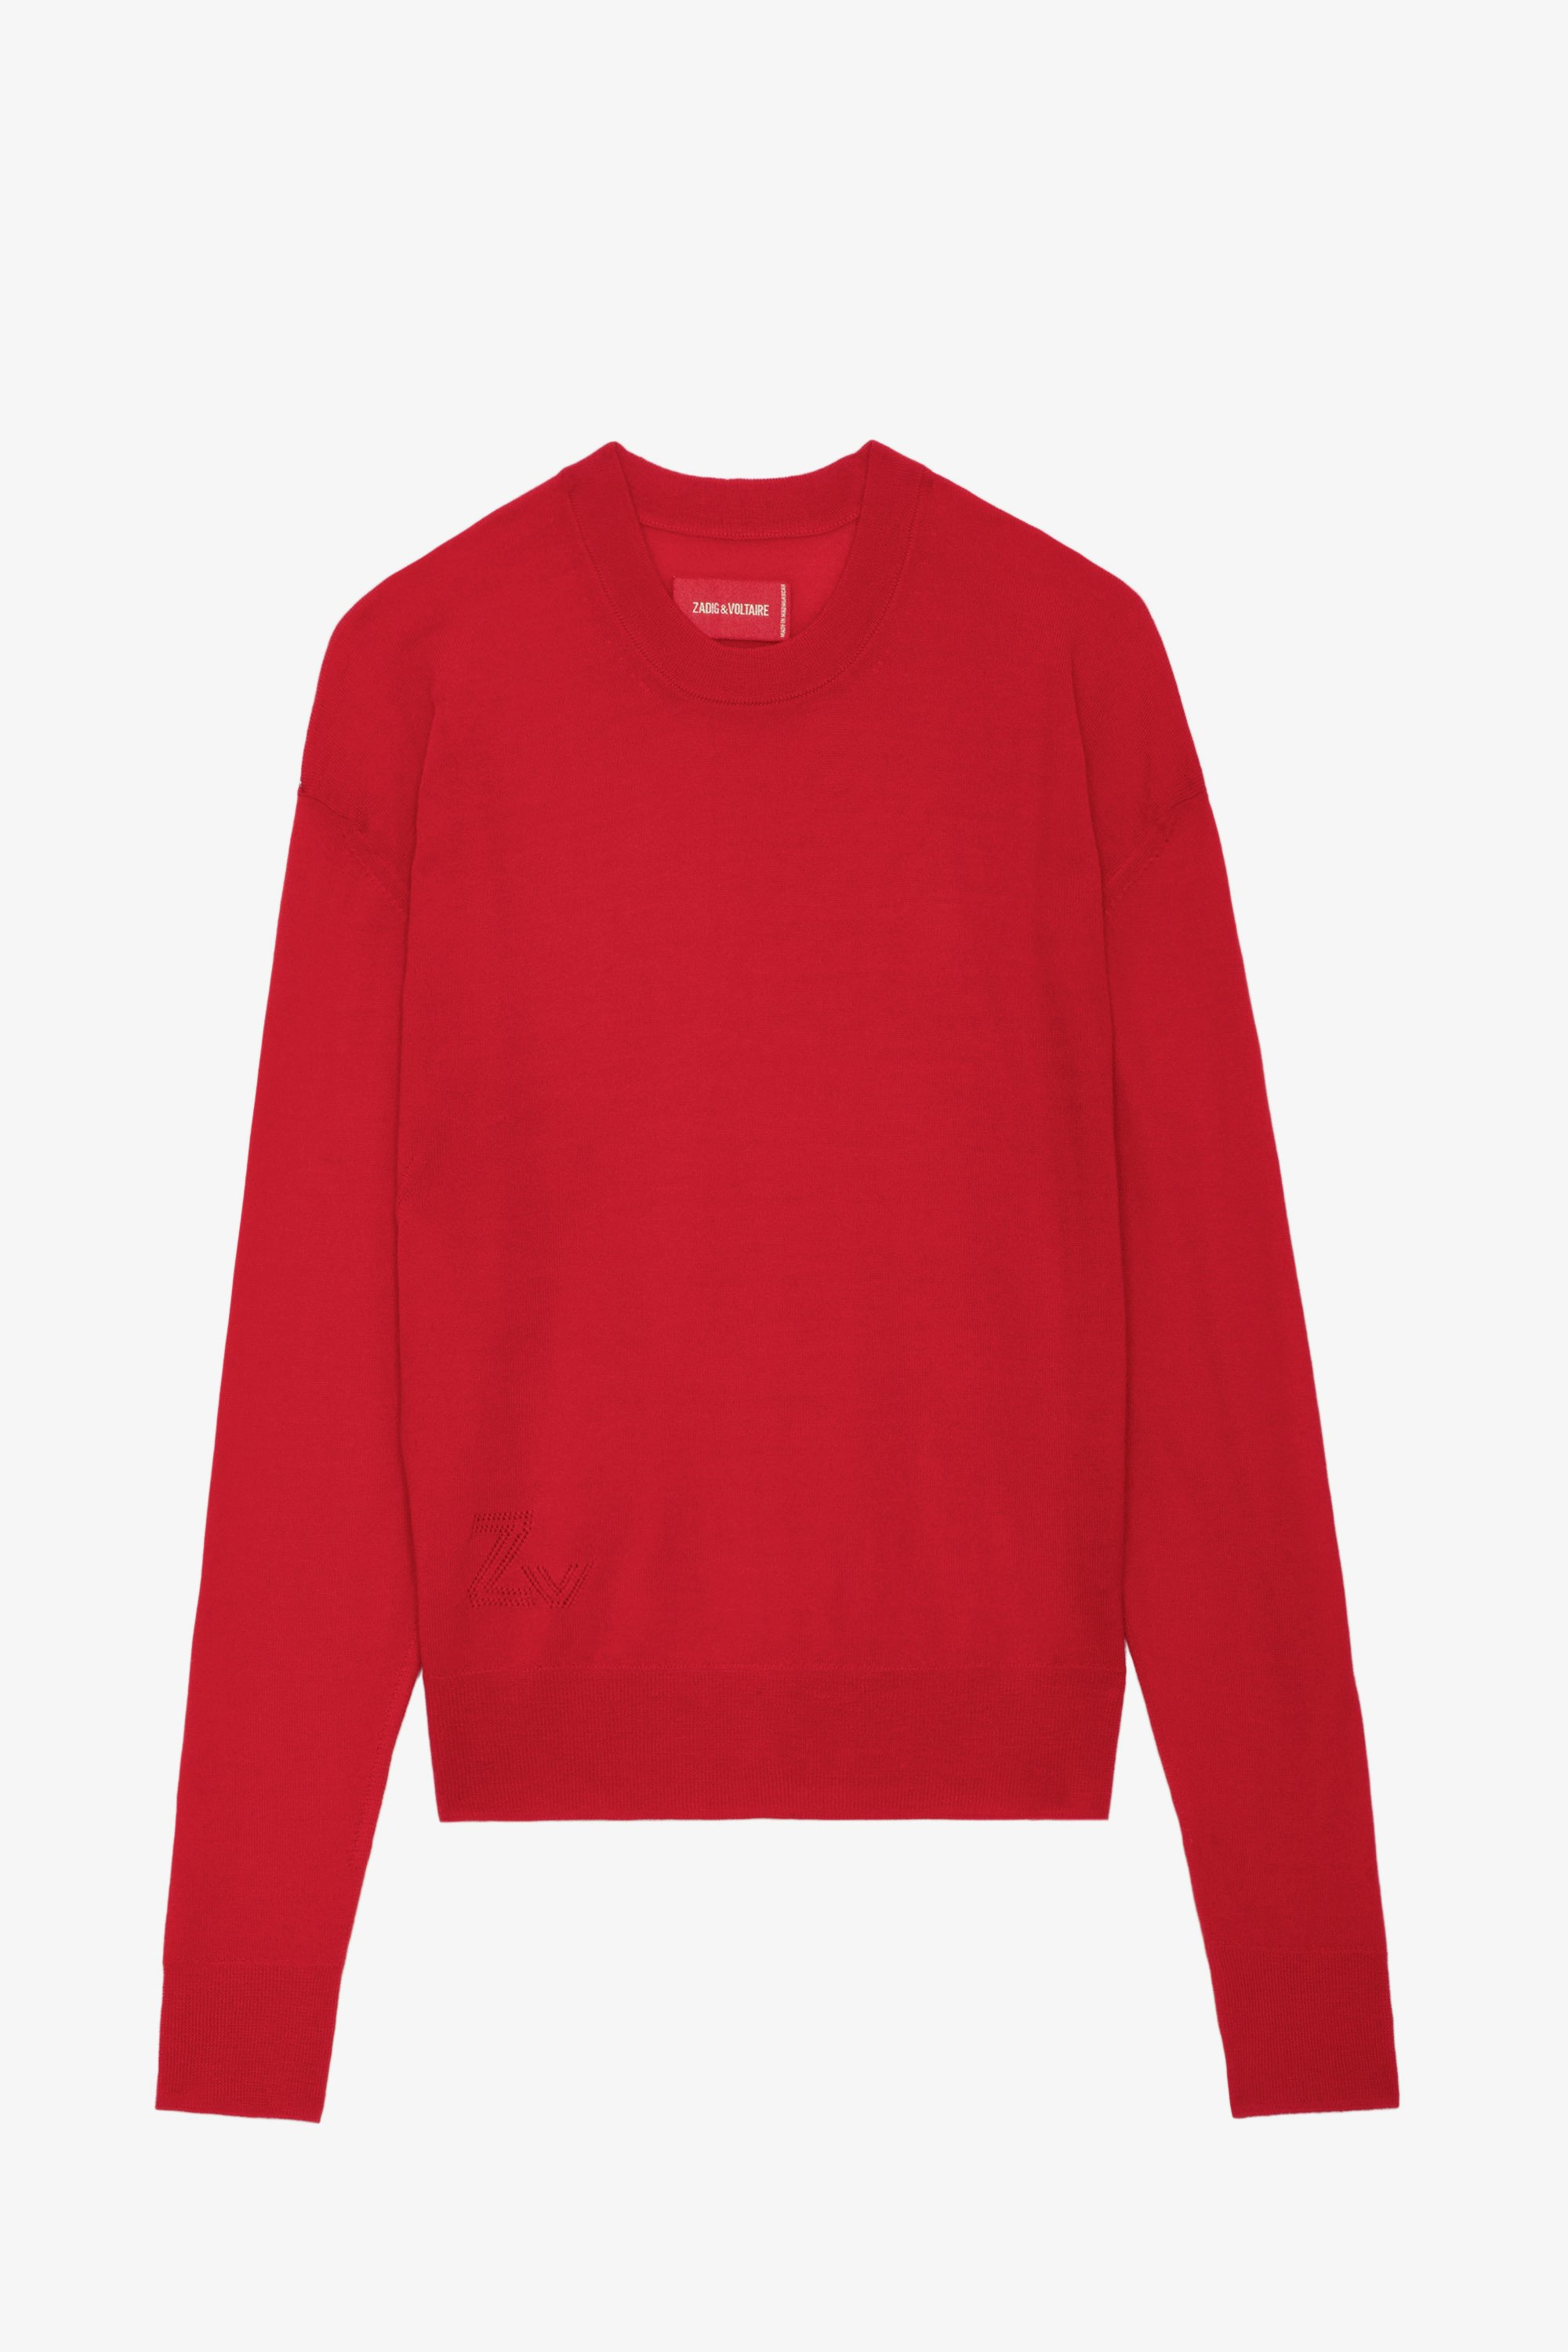 Emmy Jumper - Red merino wool round-neck jumper with long sleeves featuring a cut-out.